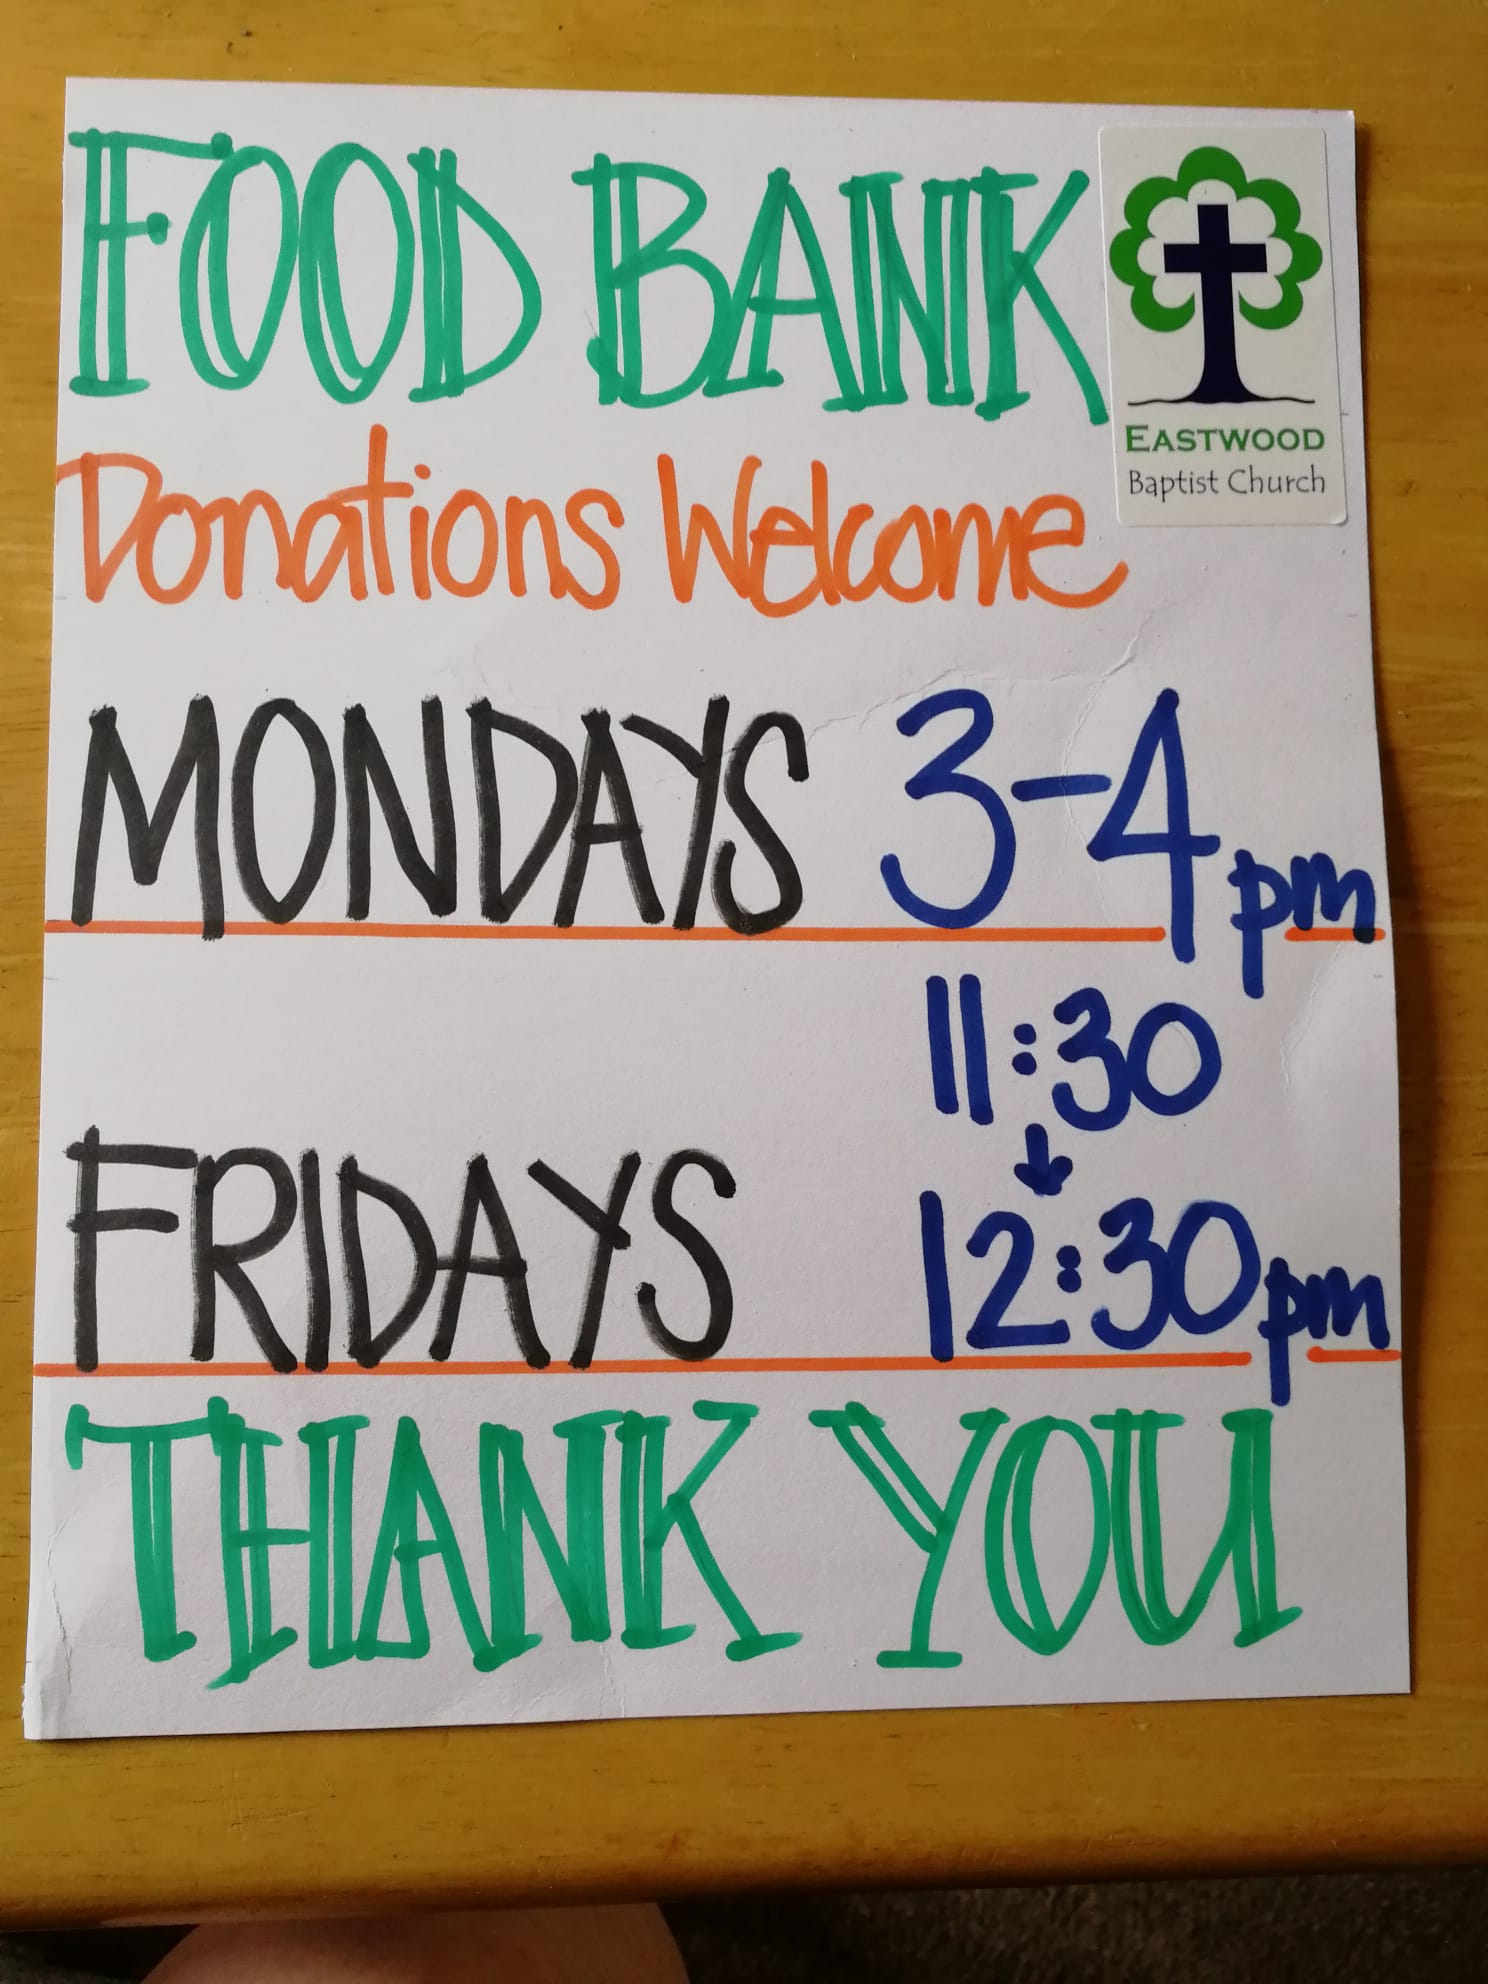 foodbank collection times